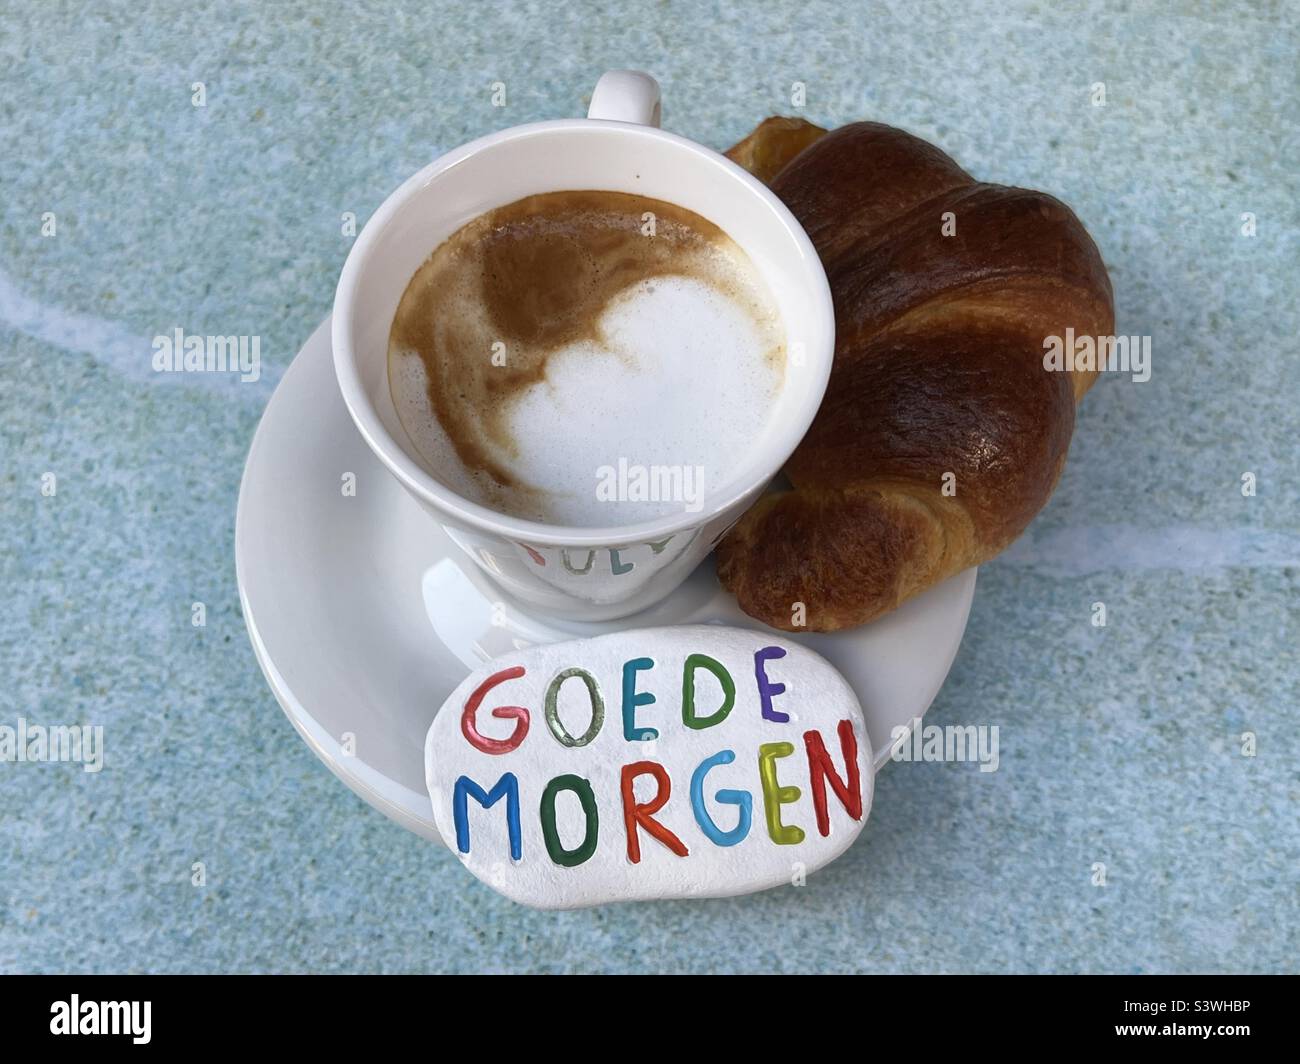 Goedemorgen Netherlands with cappuccino and croissant Stock Photo